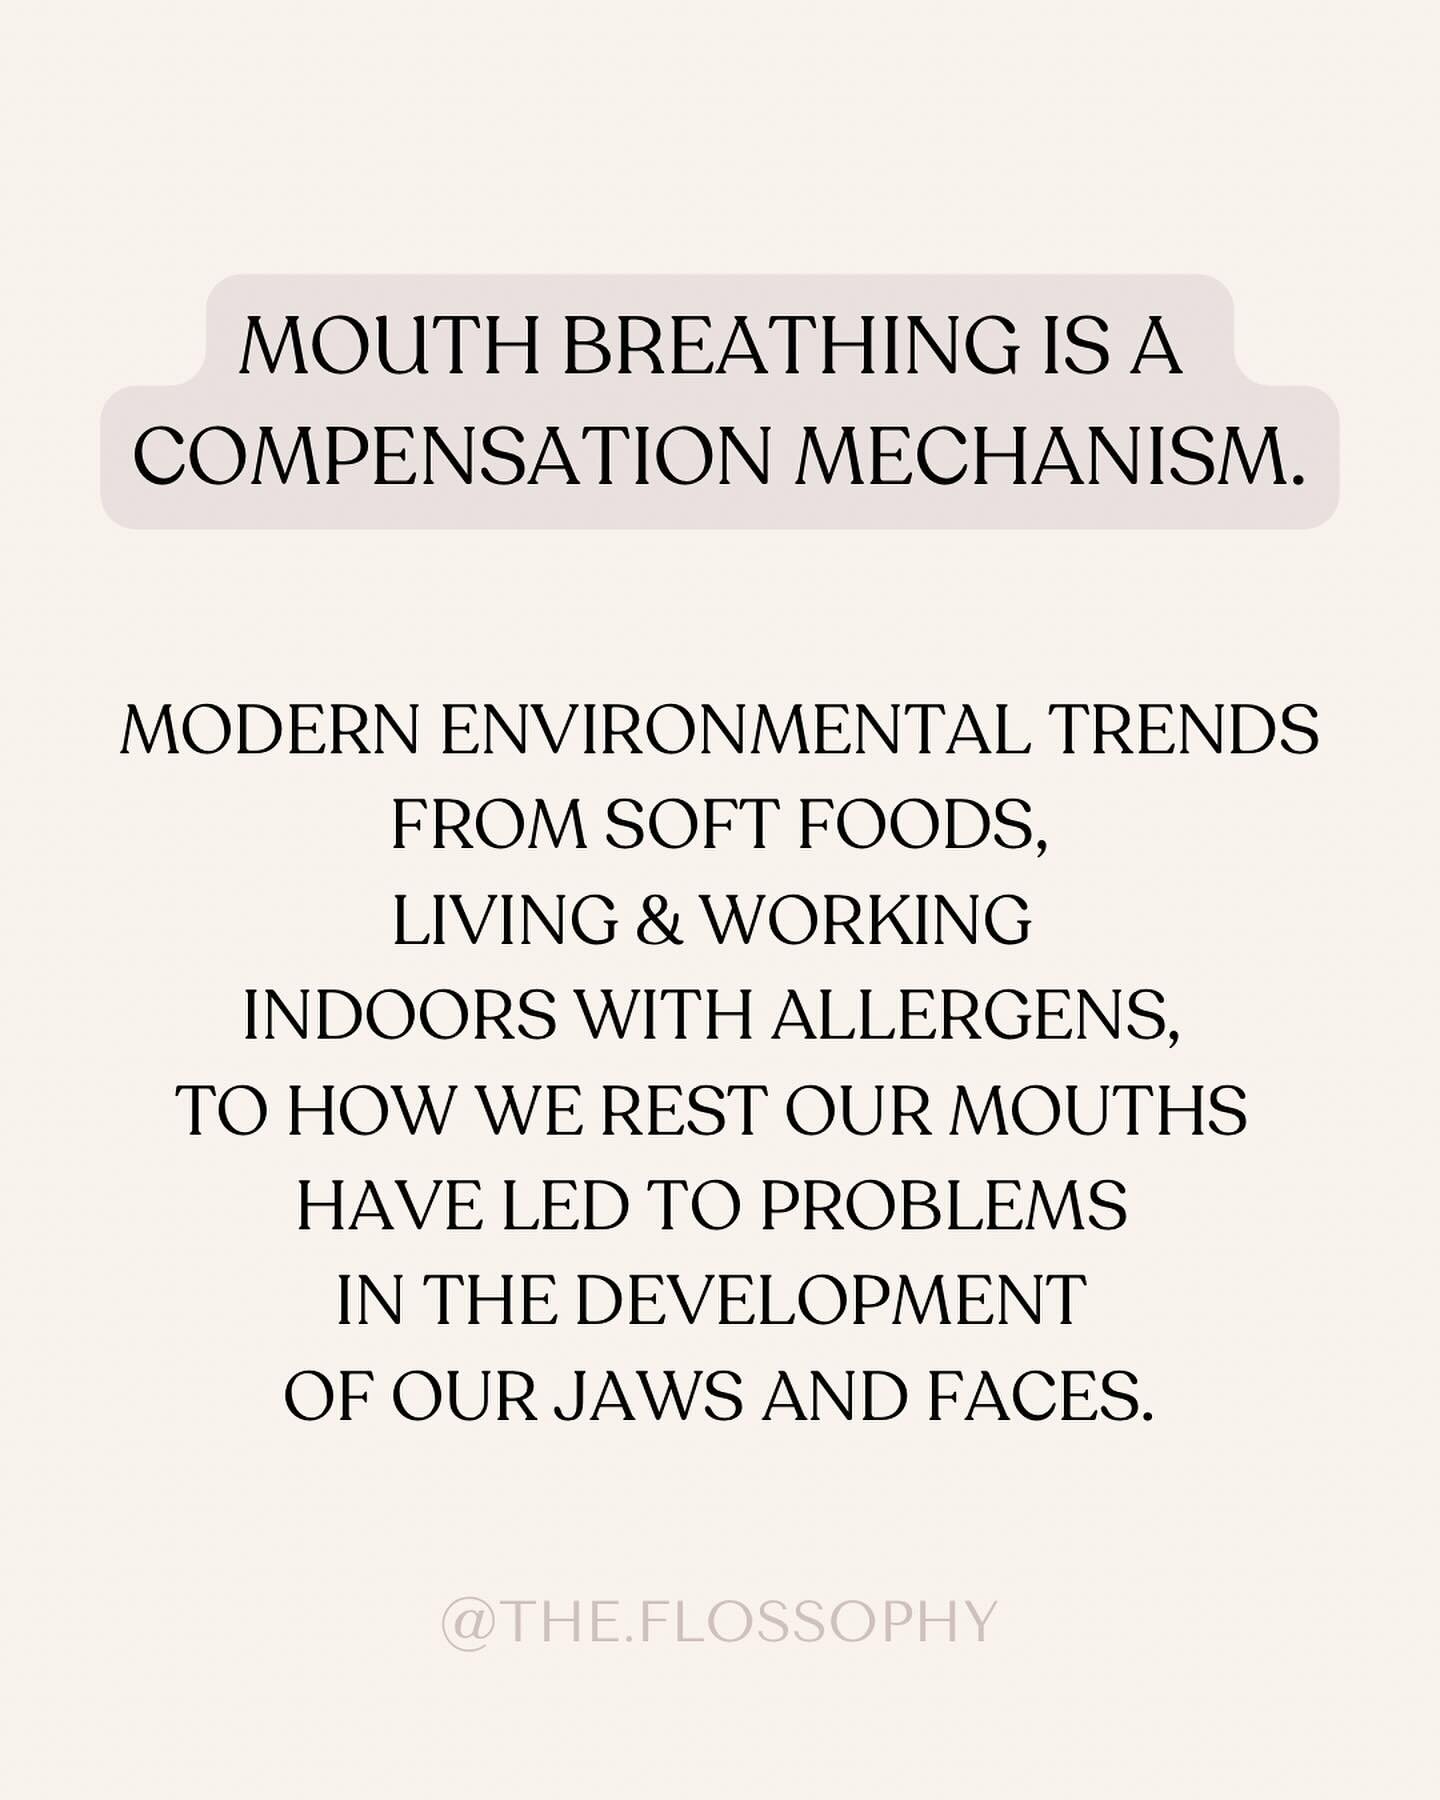 🚨Some signs of mouth breathing:

➡️Dry lips
➡️Dry mouth
➡️Snoring and open mouth while sleeping
➡️Airway illnesses/Sinus and ear infections/Colds
➡️Chronic bad breath
➡️Swollen and red gums that easily bleed

🌎A few centuries ago the effects were s